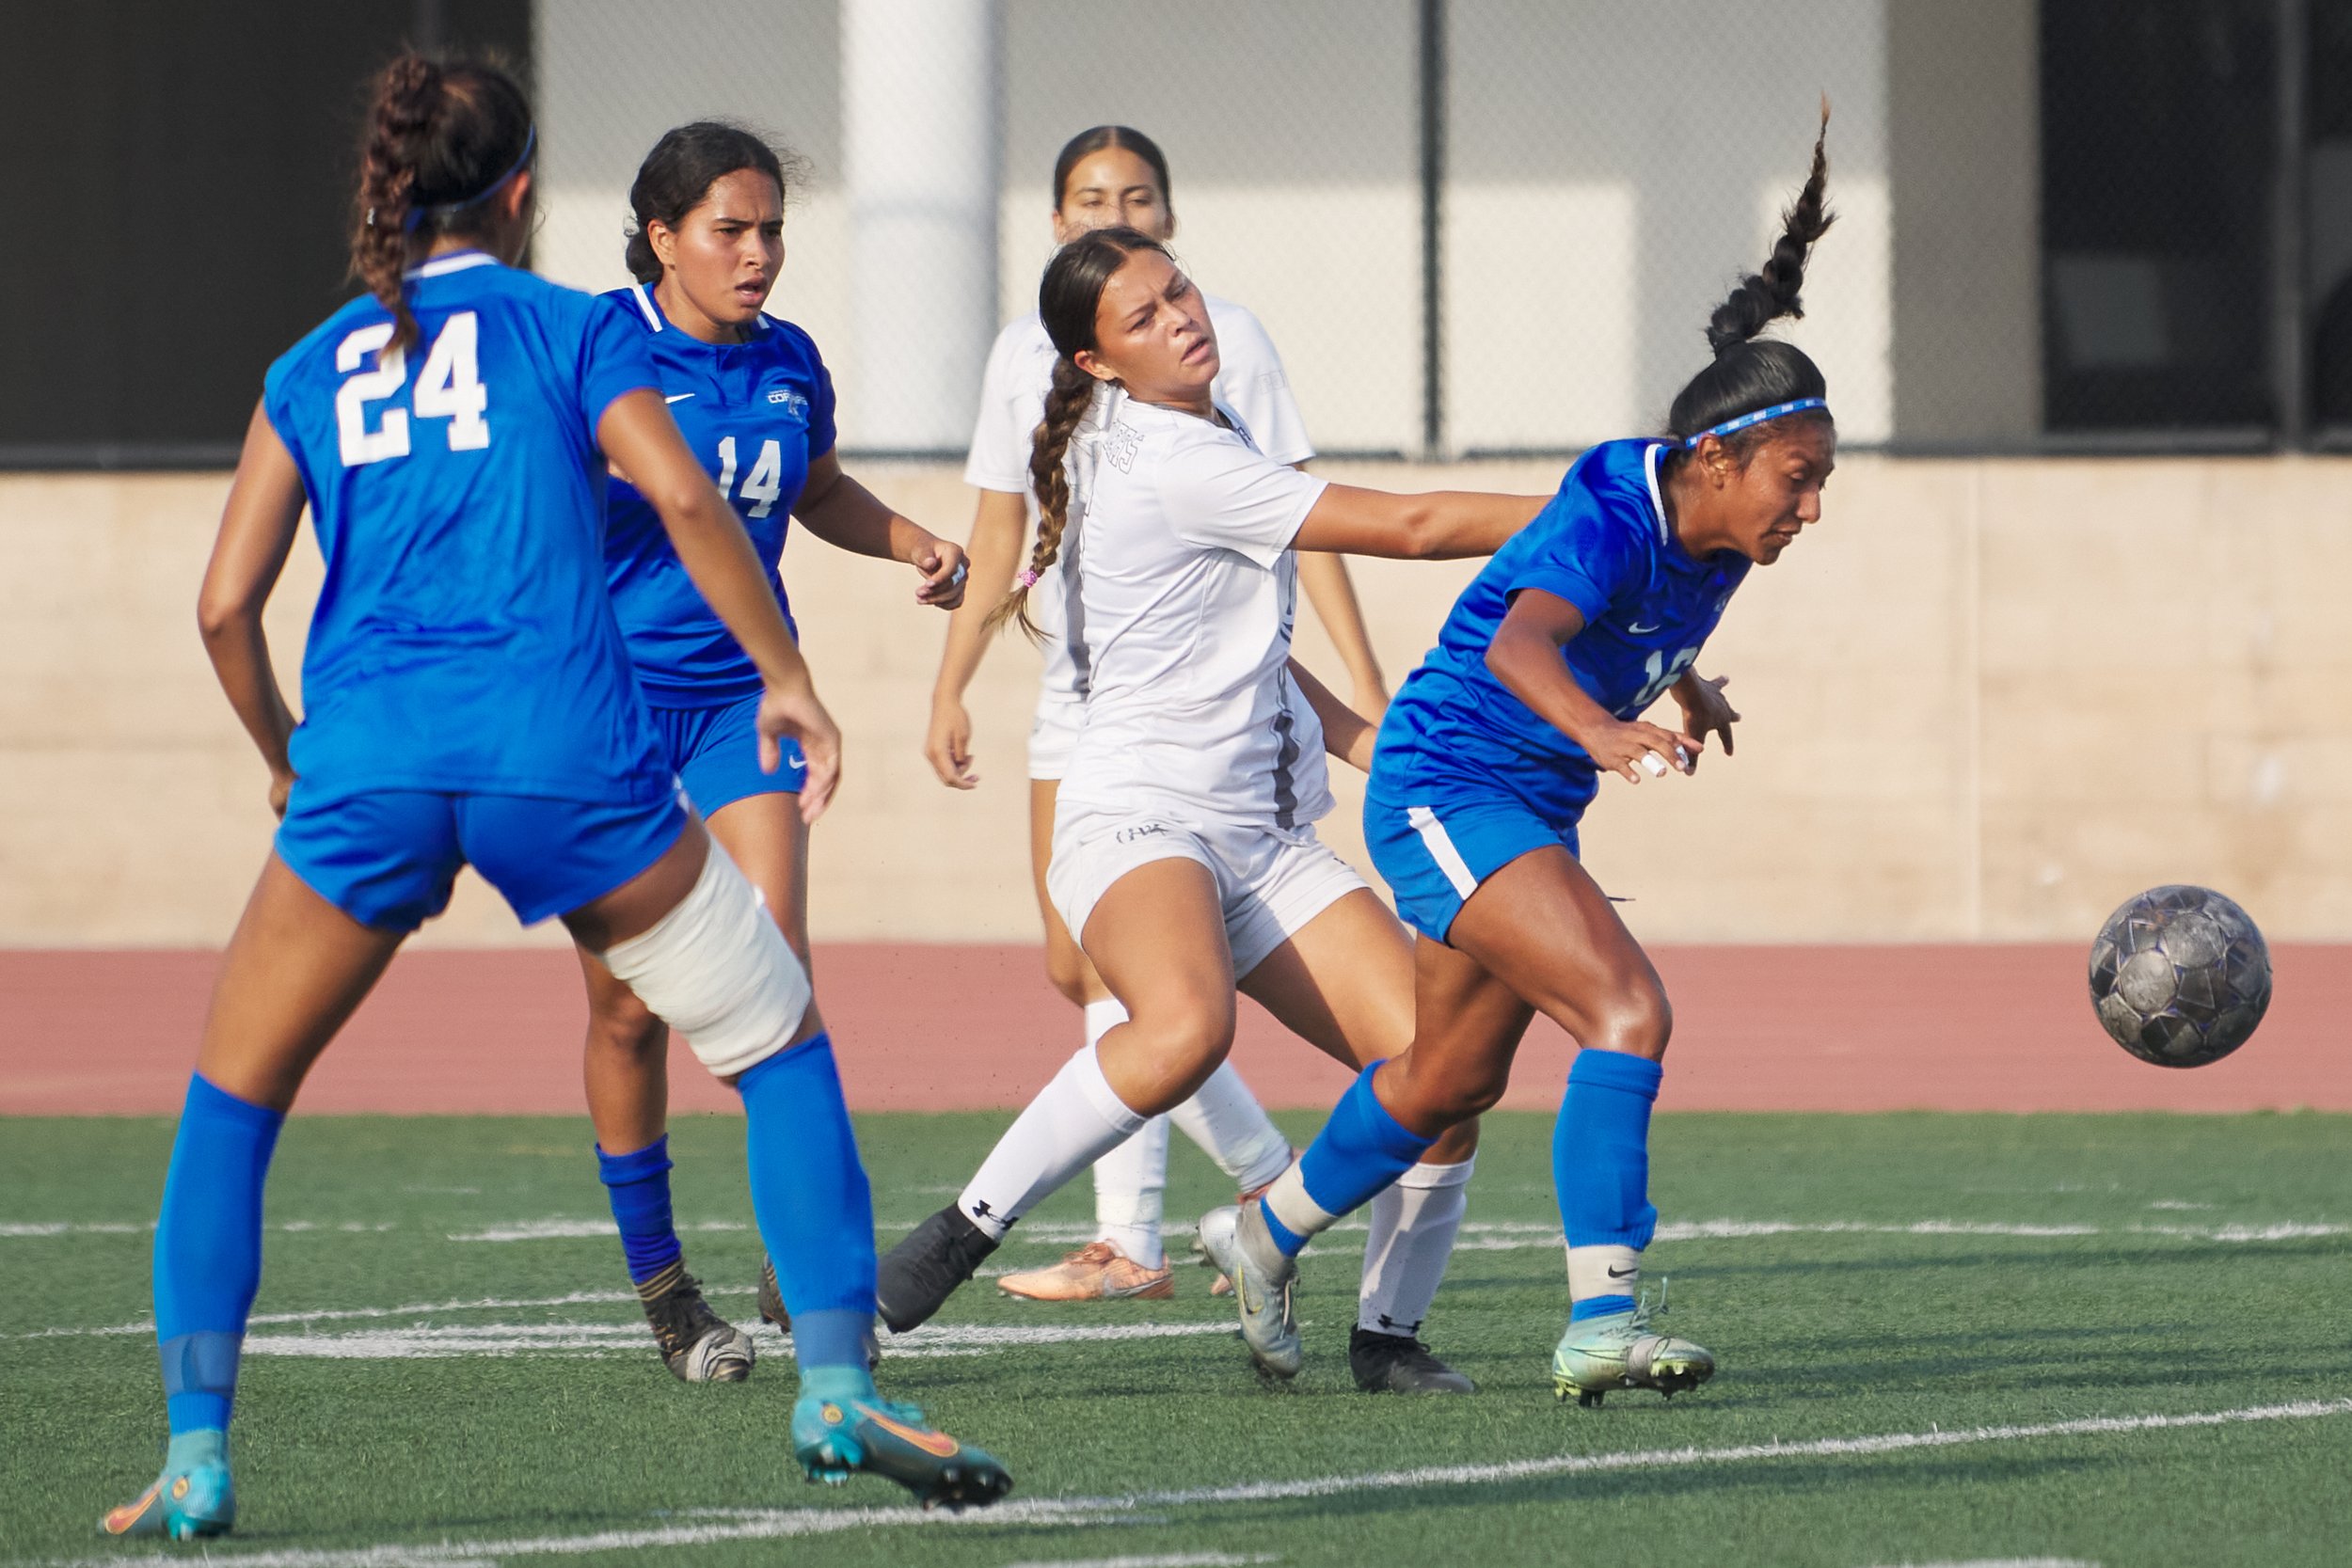  Antelope Valley College Marauders' Emily Serrano (center) shoves Santa Monica College Corsairs' Diana Gaspar (right) during the women's soccer match on Tuesday, Oct. 11, 2022, at Corsair Field in Santa Monica, Calif. The Corsairs lost 6-0. (Nicholas